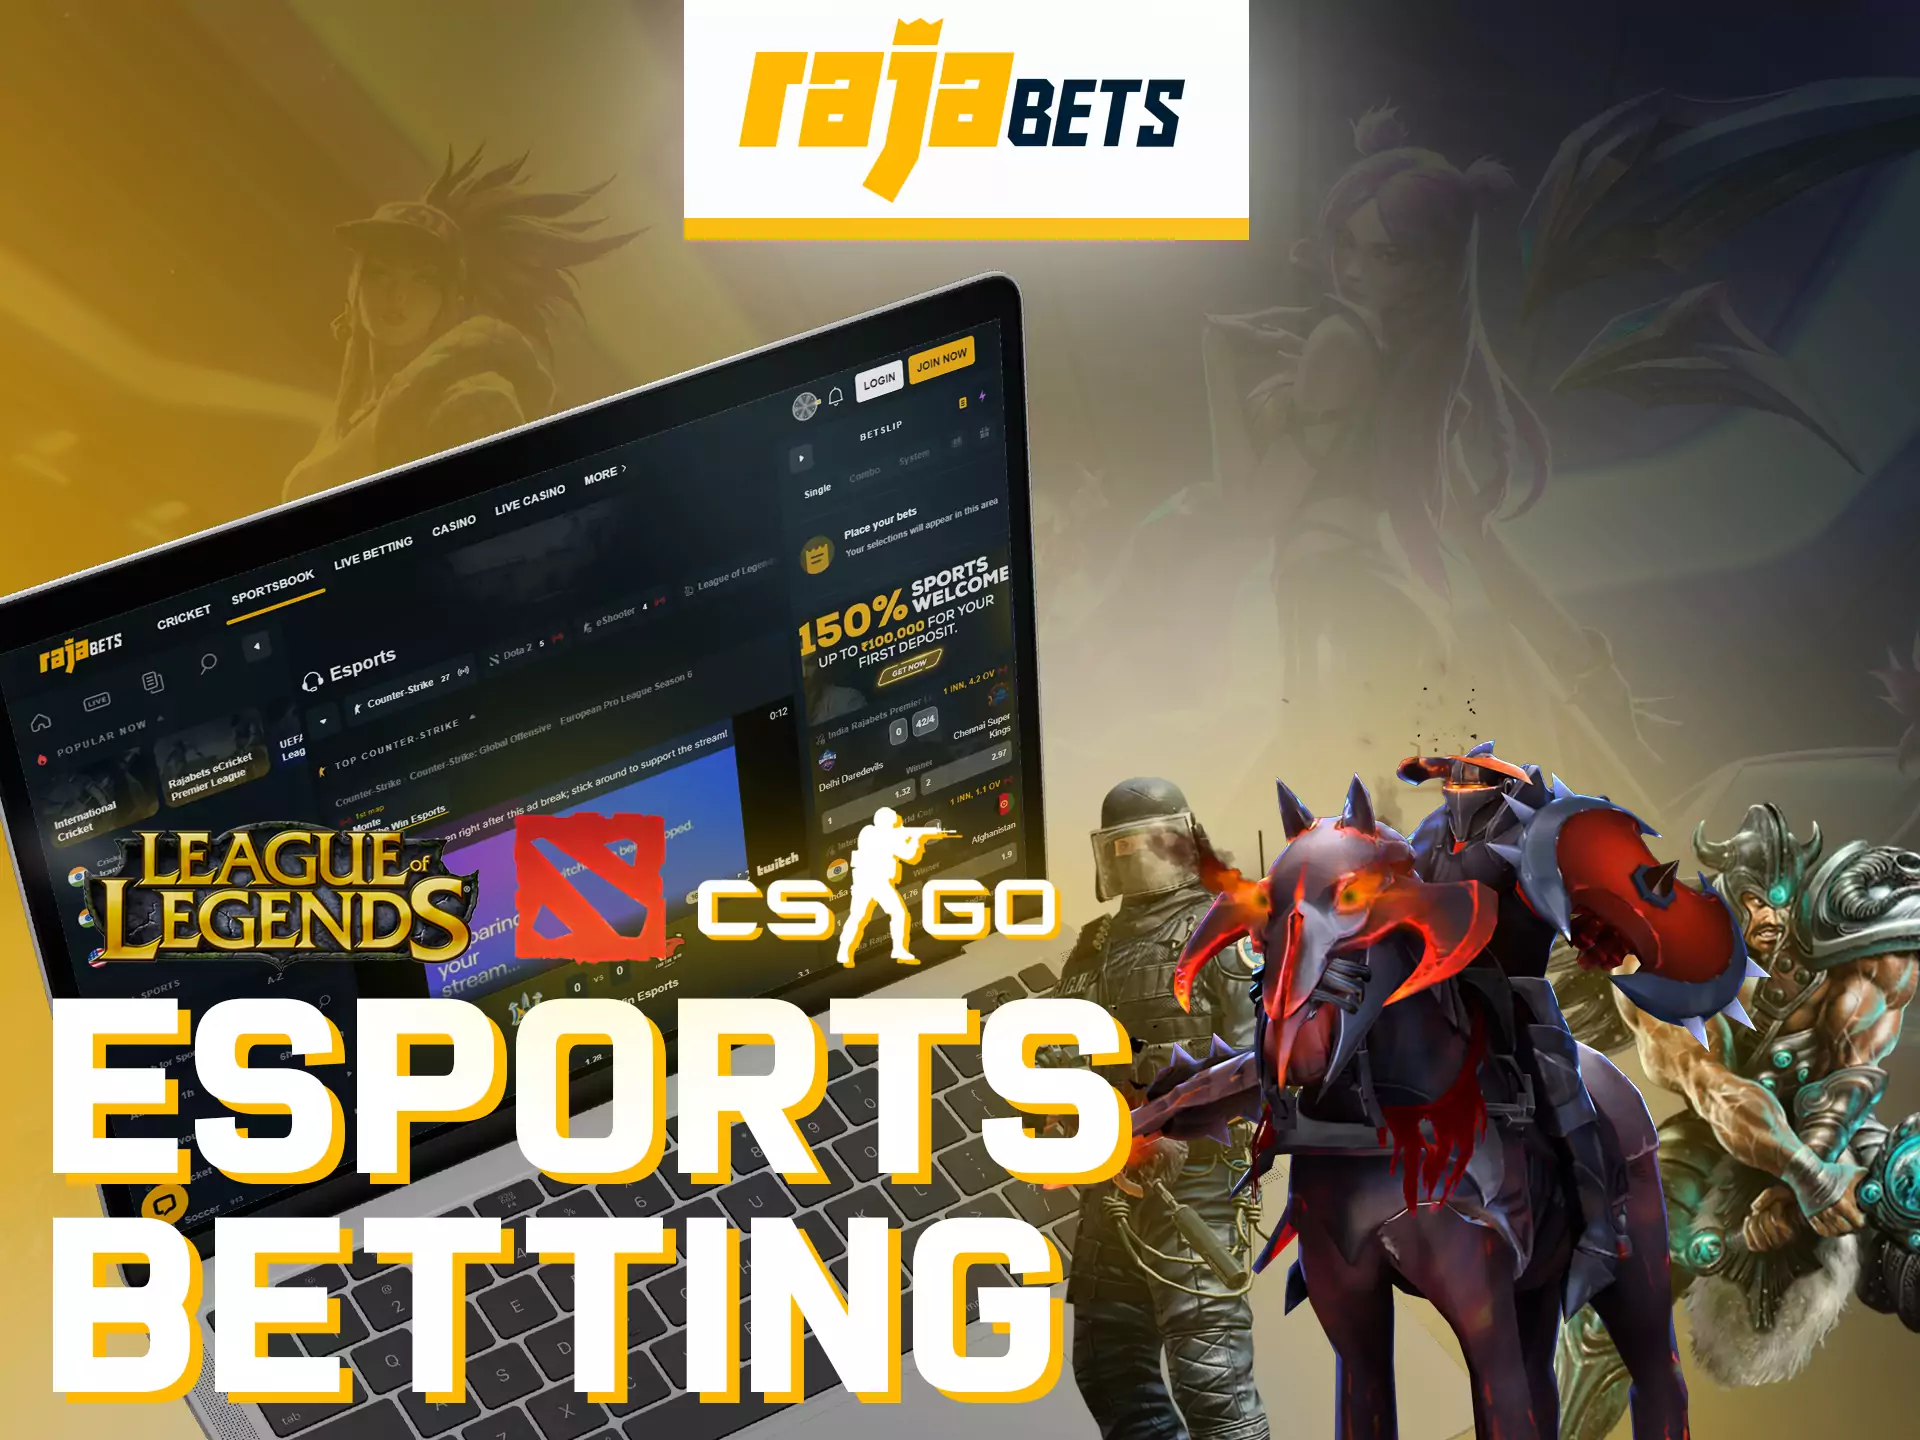 If you're a eSports fan, bet on Rajabets.